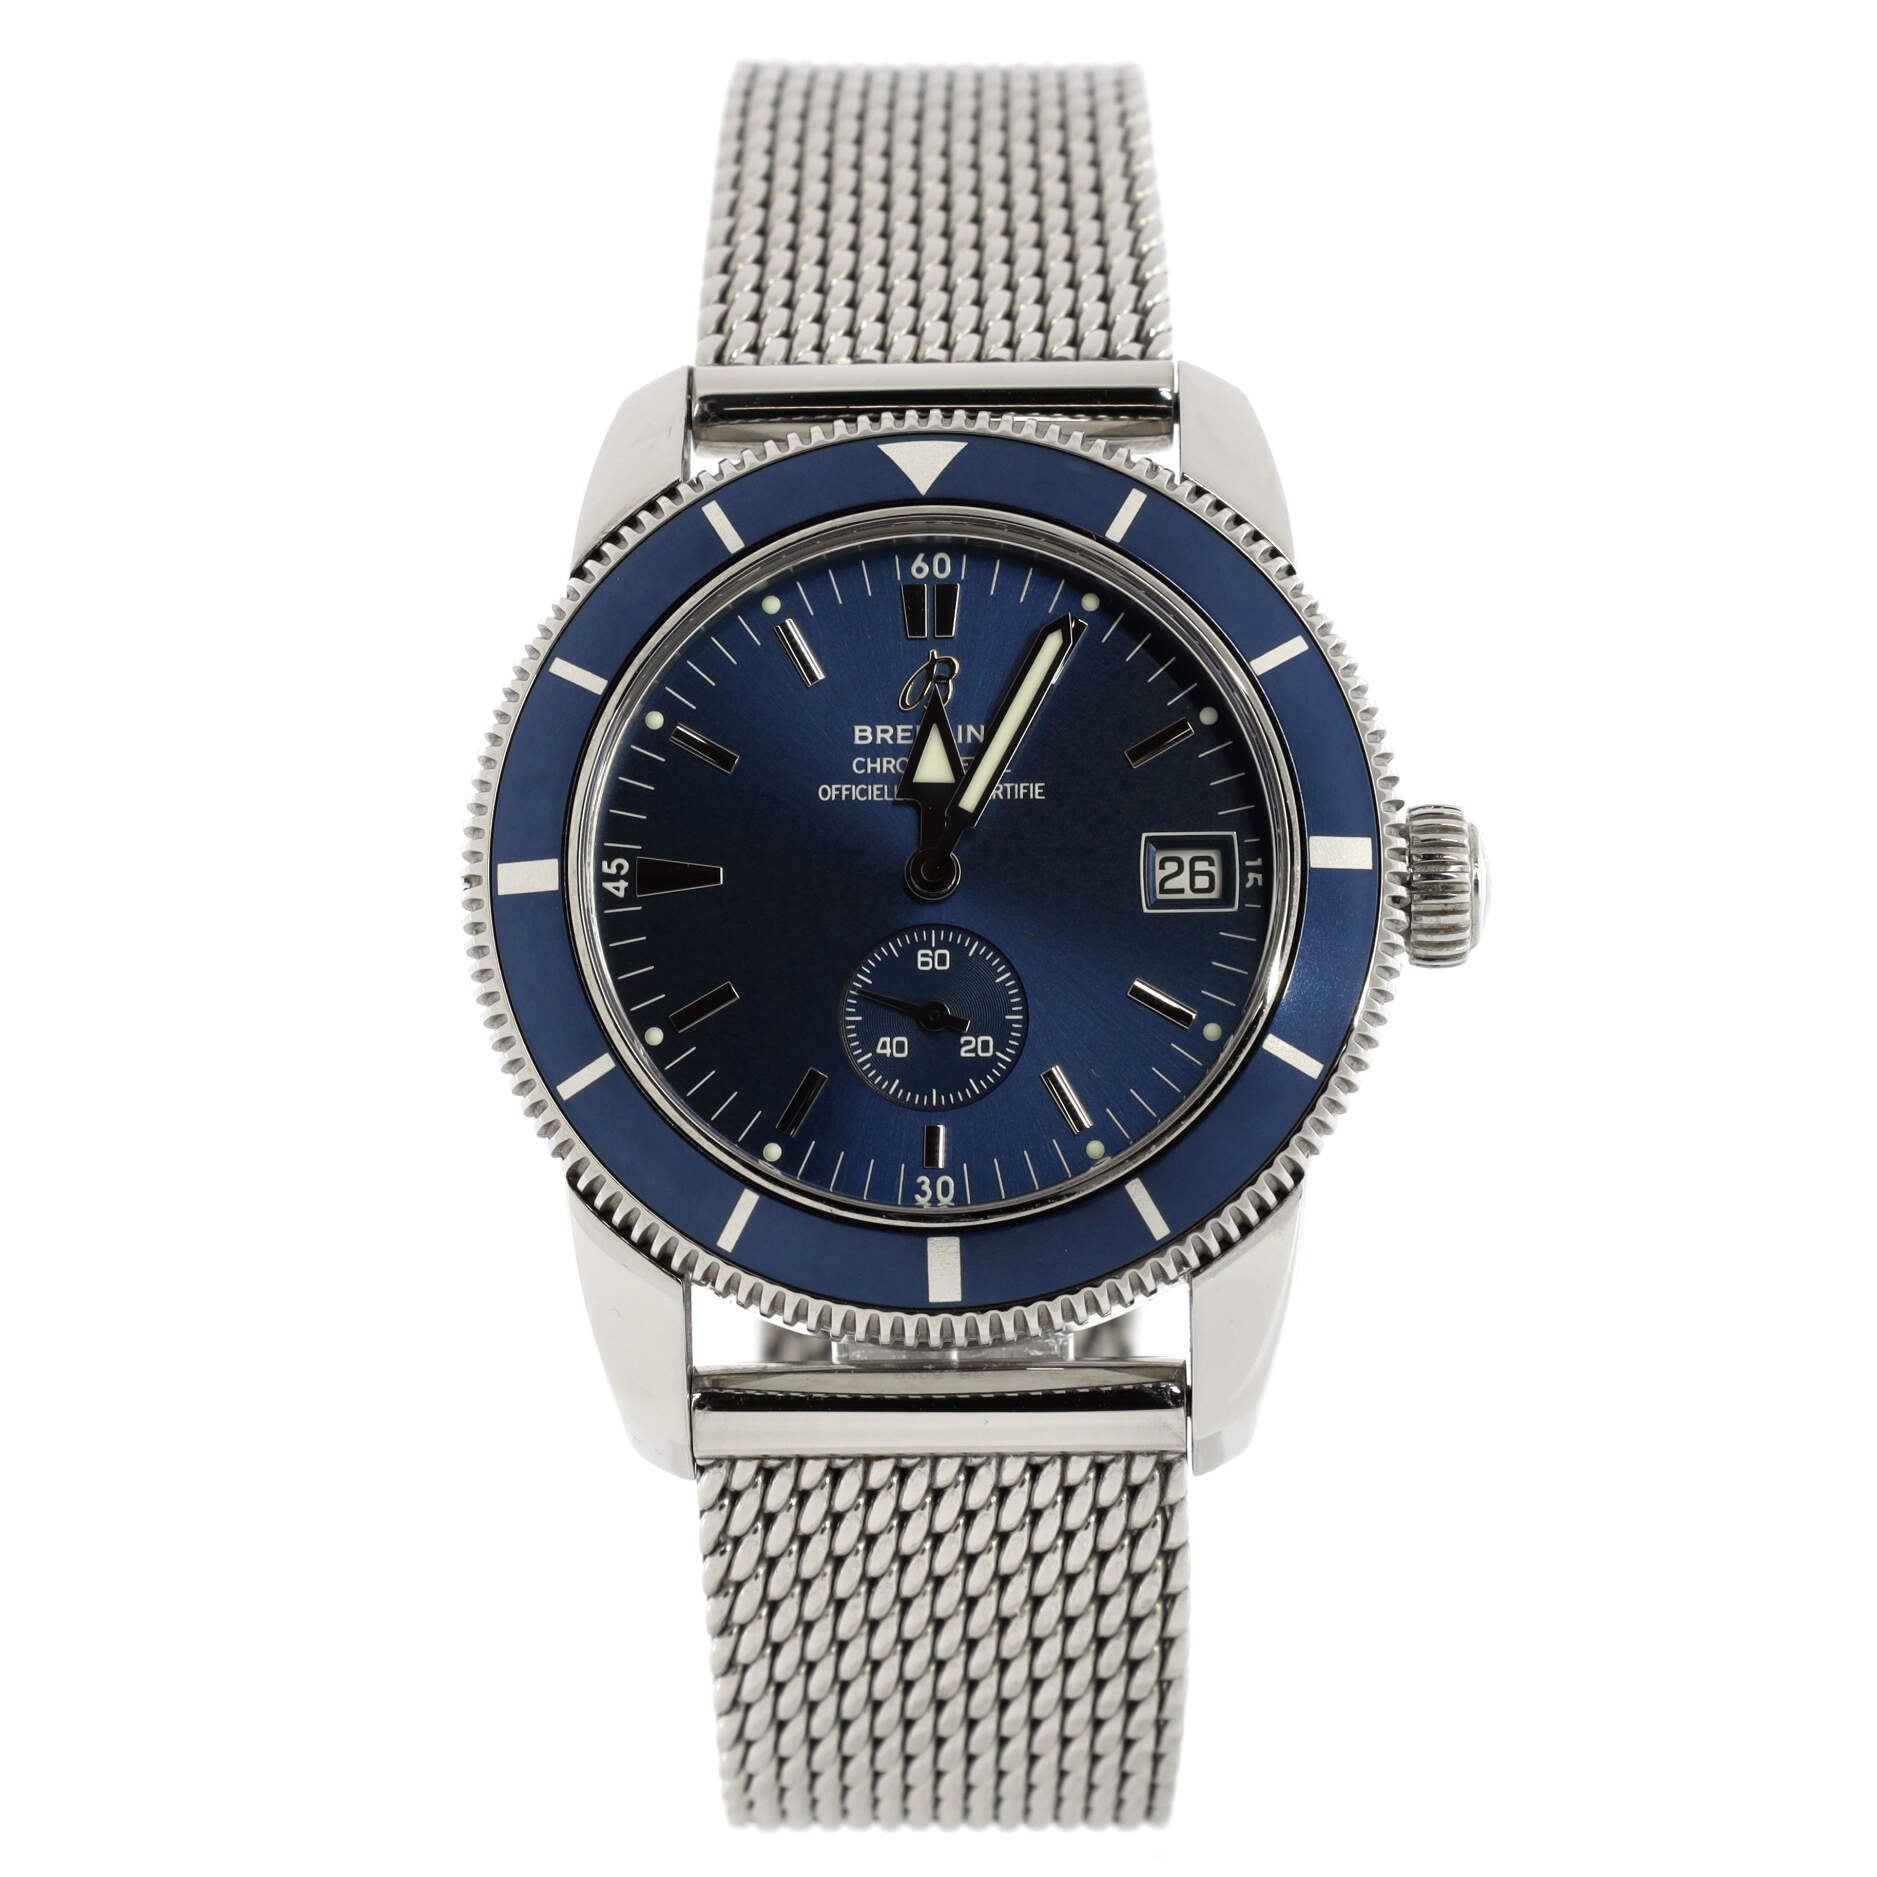 SuperOcean Heritage Chronometer Automatic Watch (A3732)